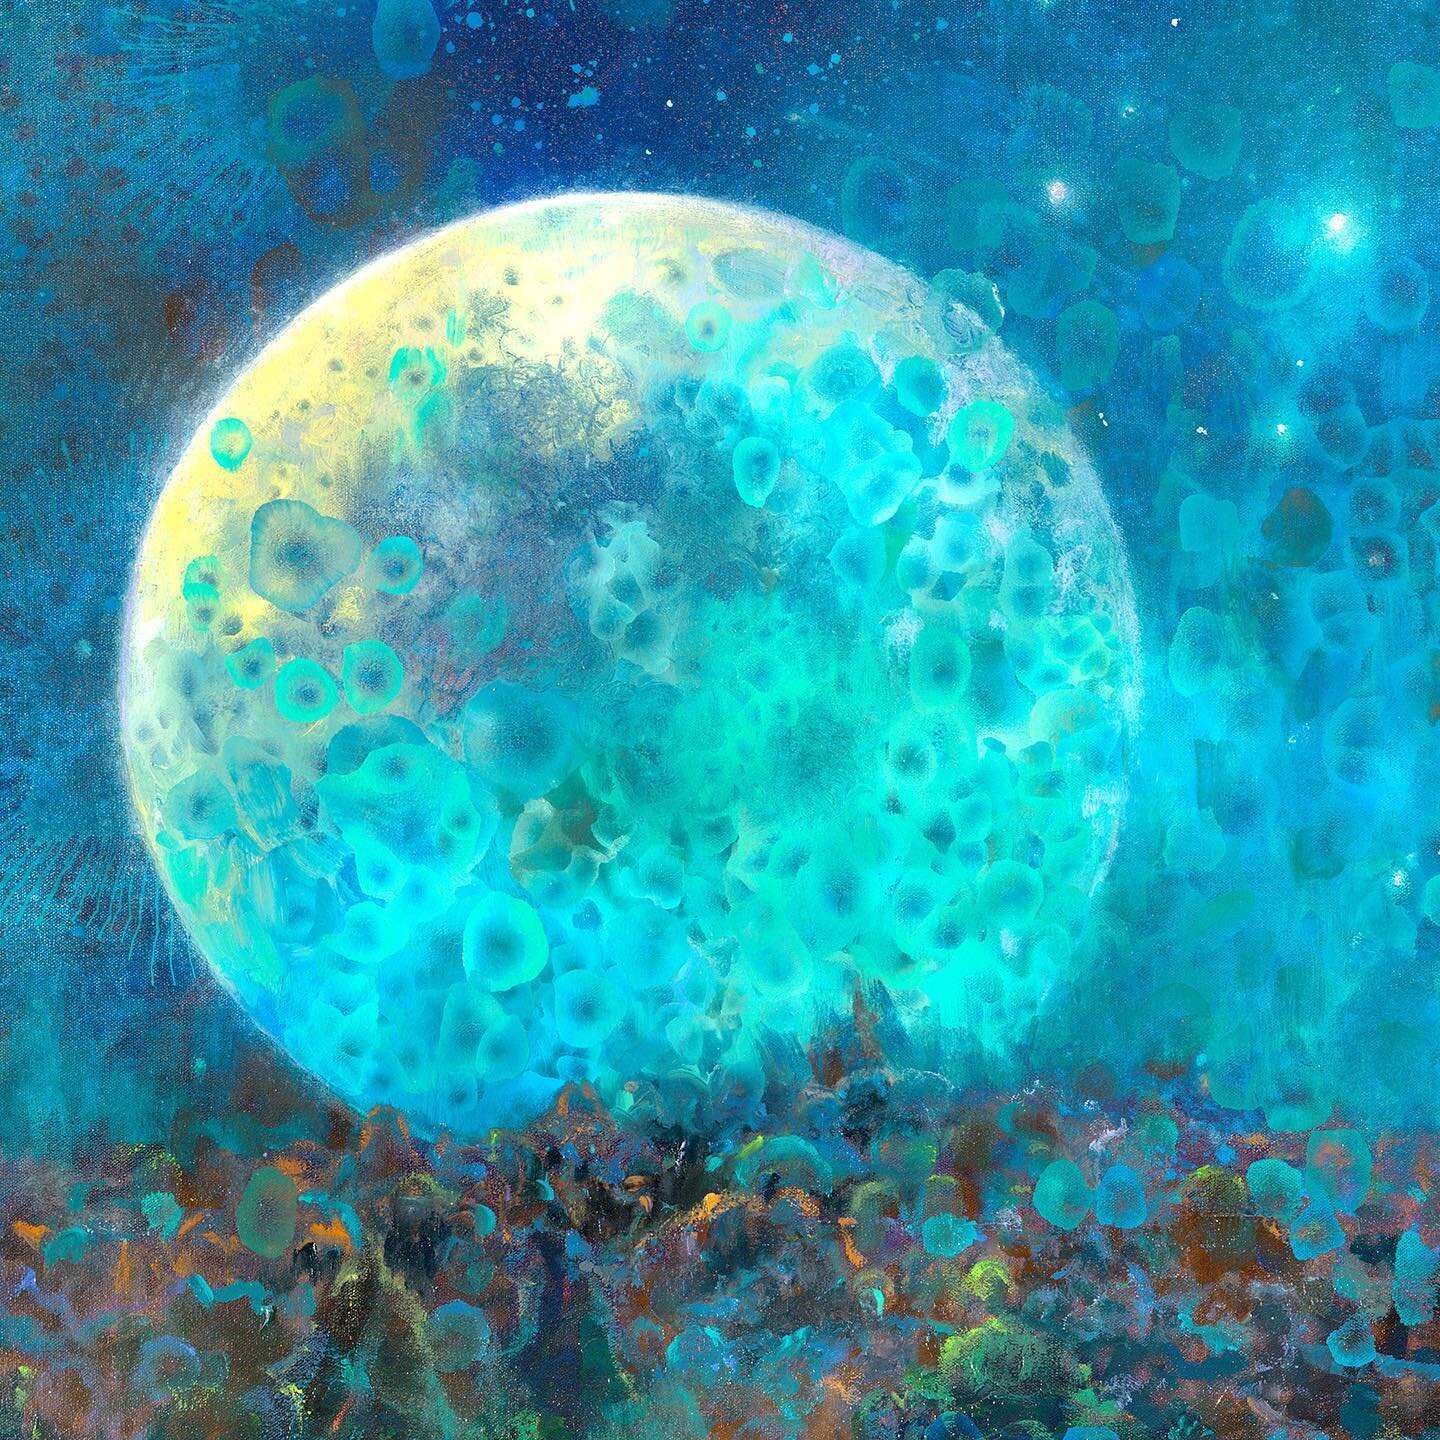 Details detail details. 
Sharing with you a zoomed in view of some sections from my new painting &ldquo;New Mexico Moonrise&rdquo; 72x72 inch 

Lots more at IrisScott.com

#moon #fullmoon #moonrise #lunar #luna